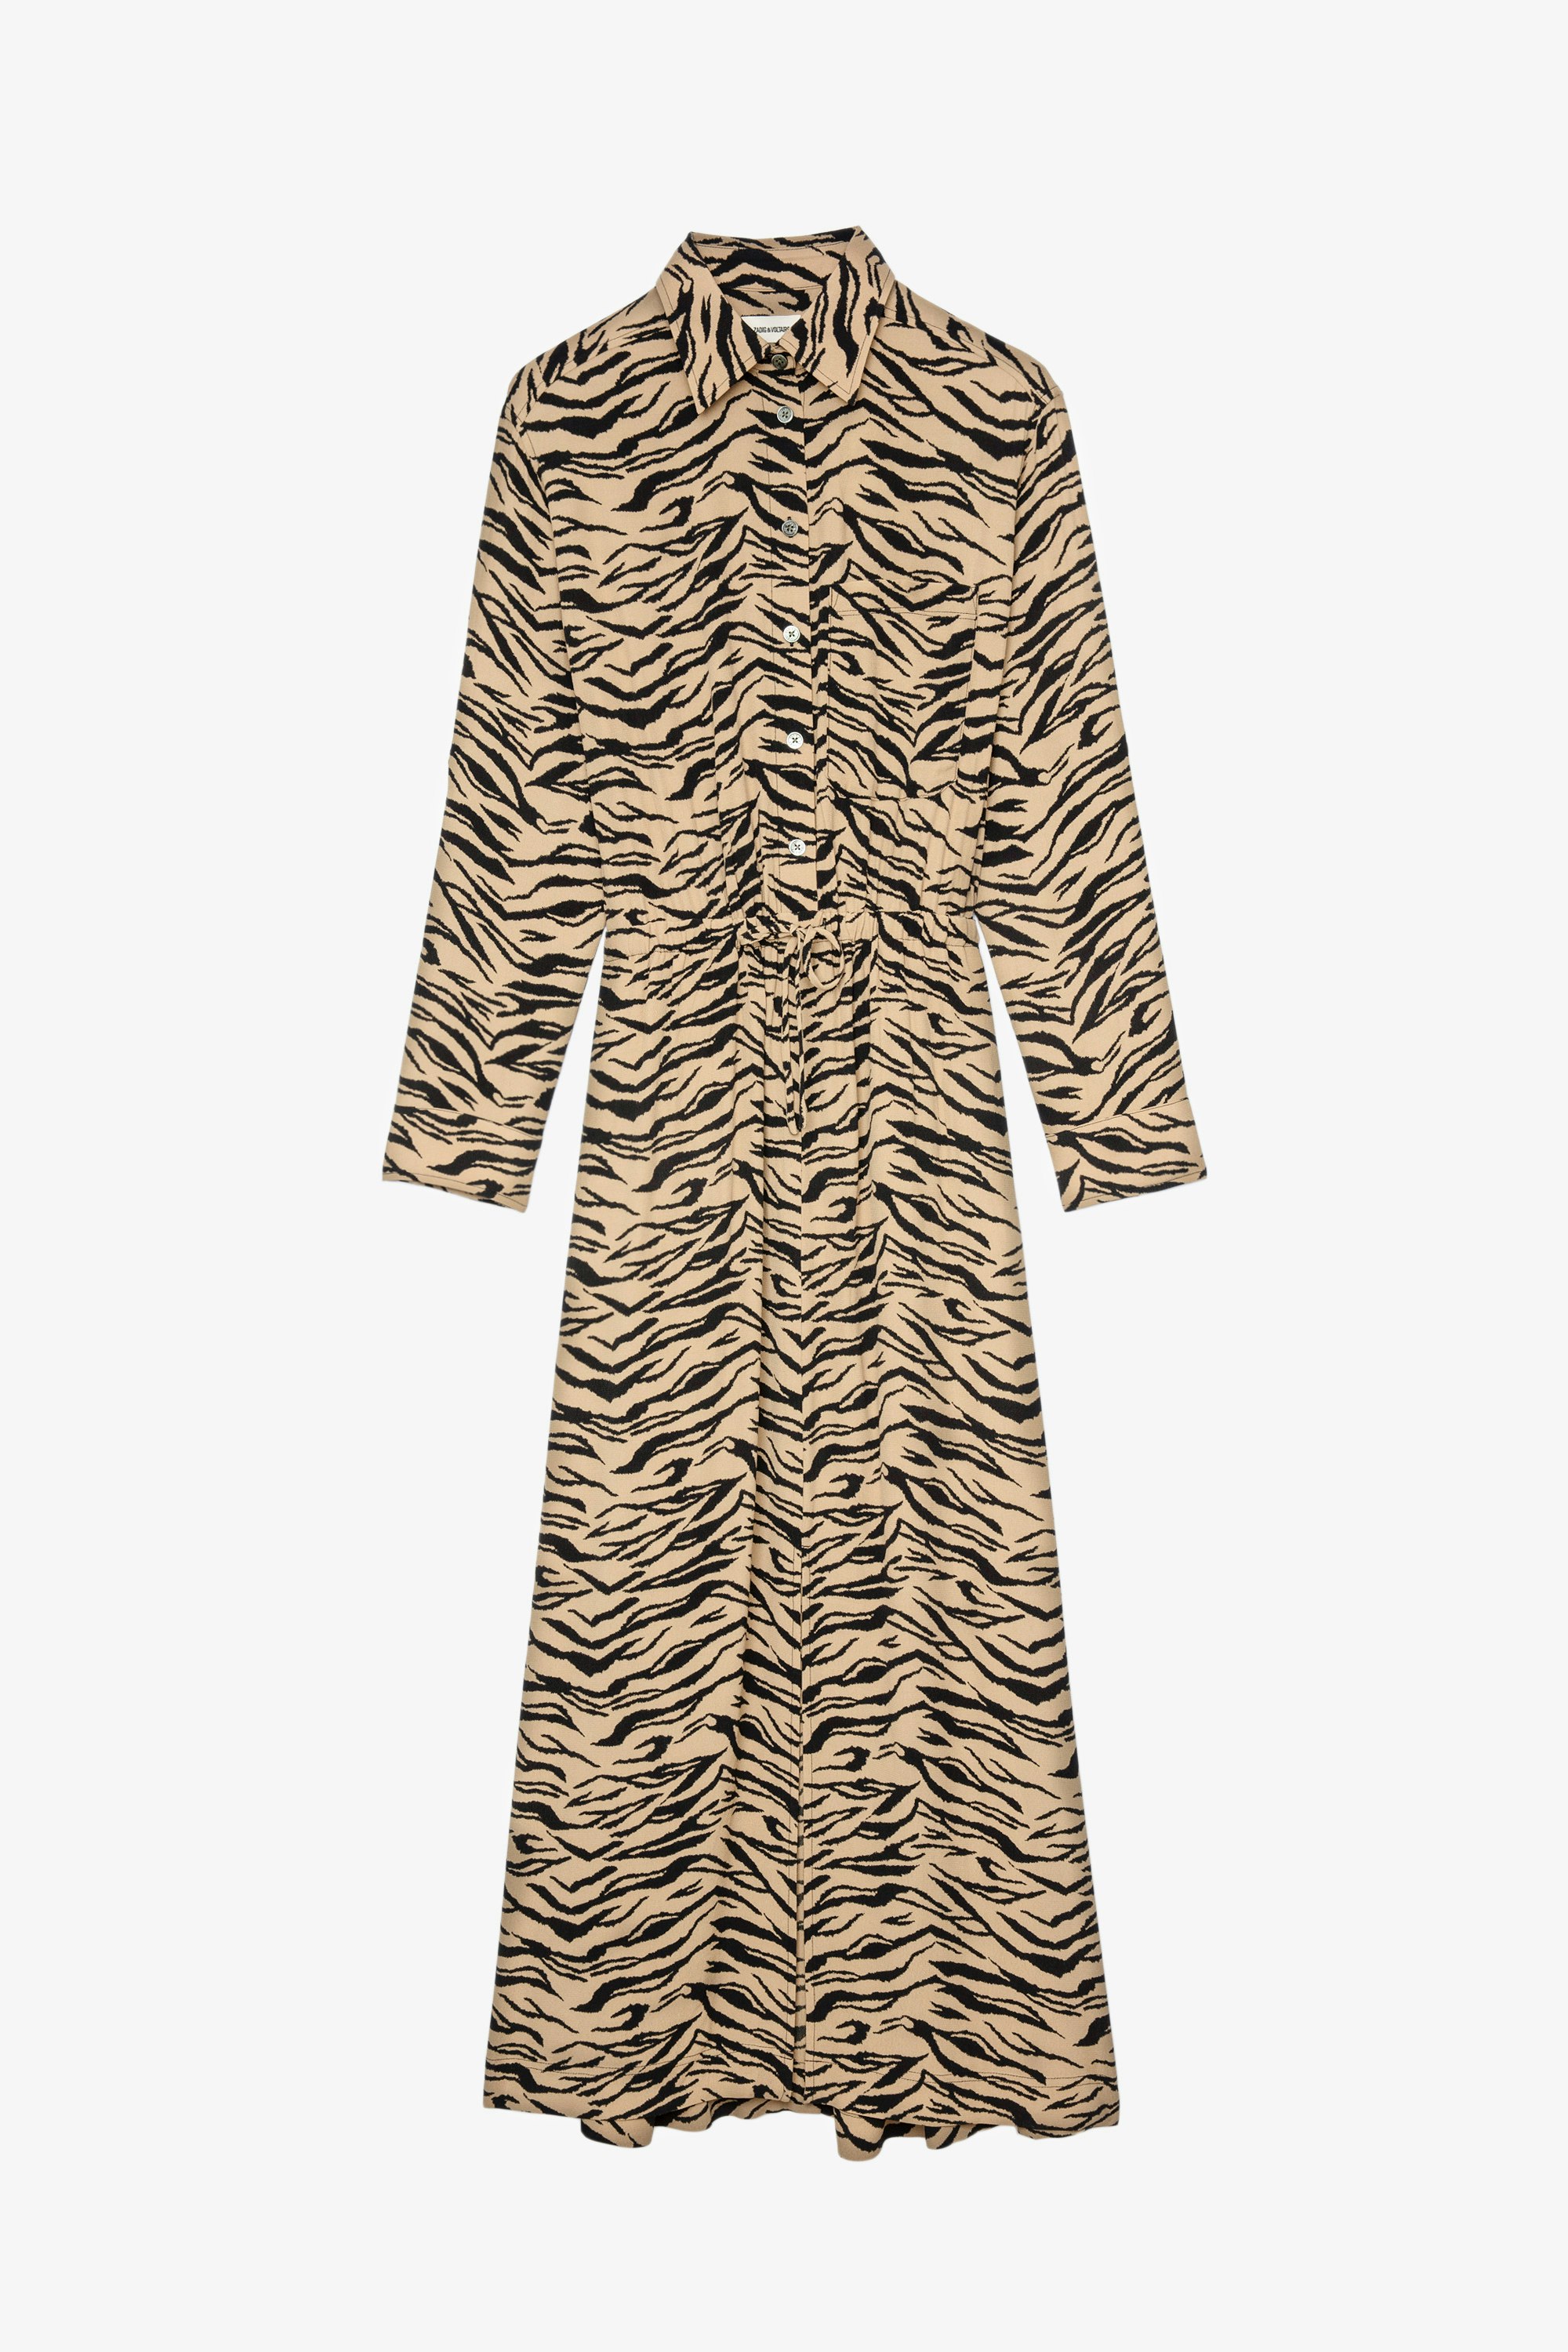 Radial Tiger ドレス Women's long-sleeved maxi dress with tiger print